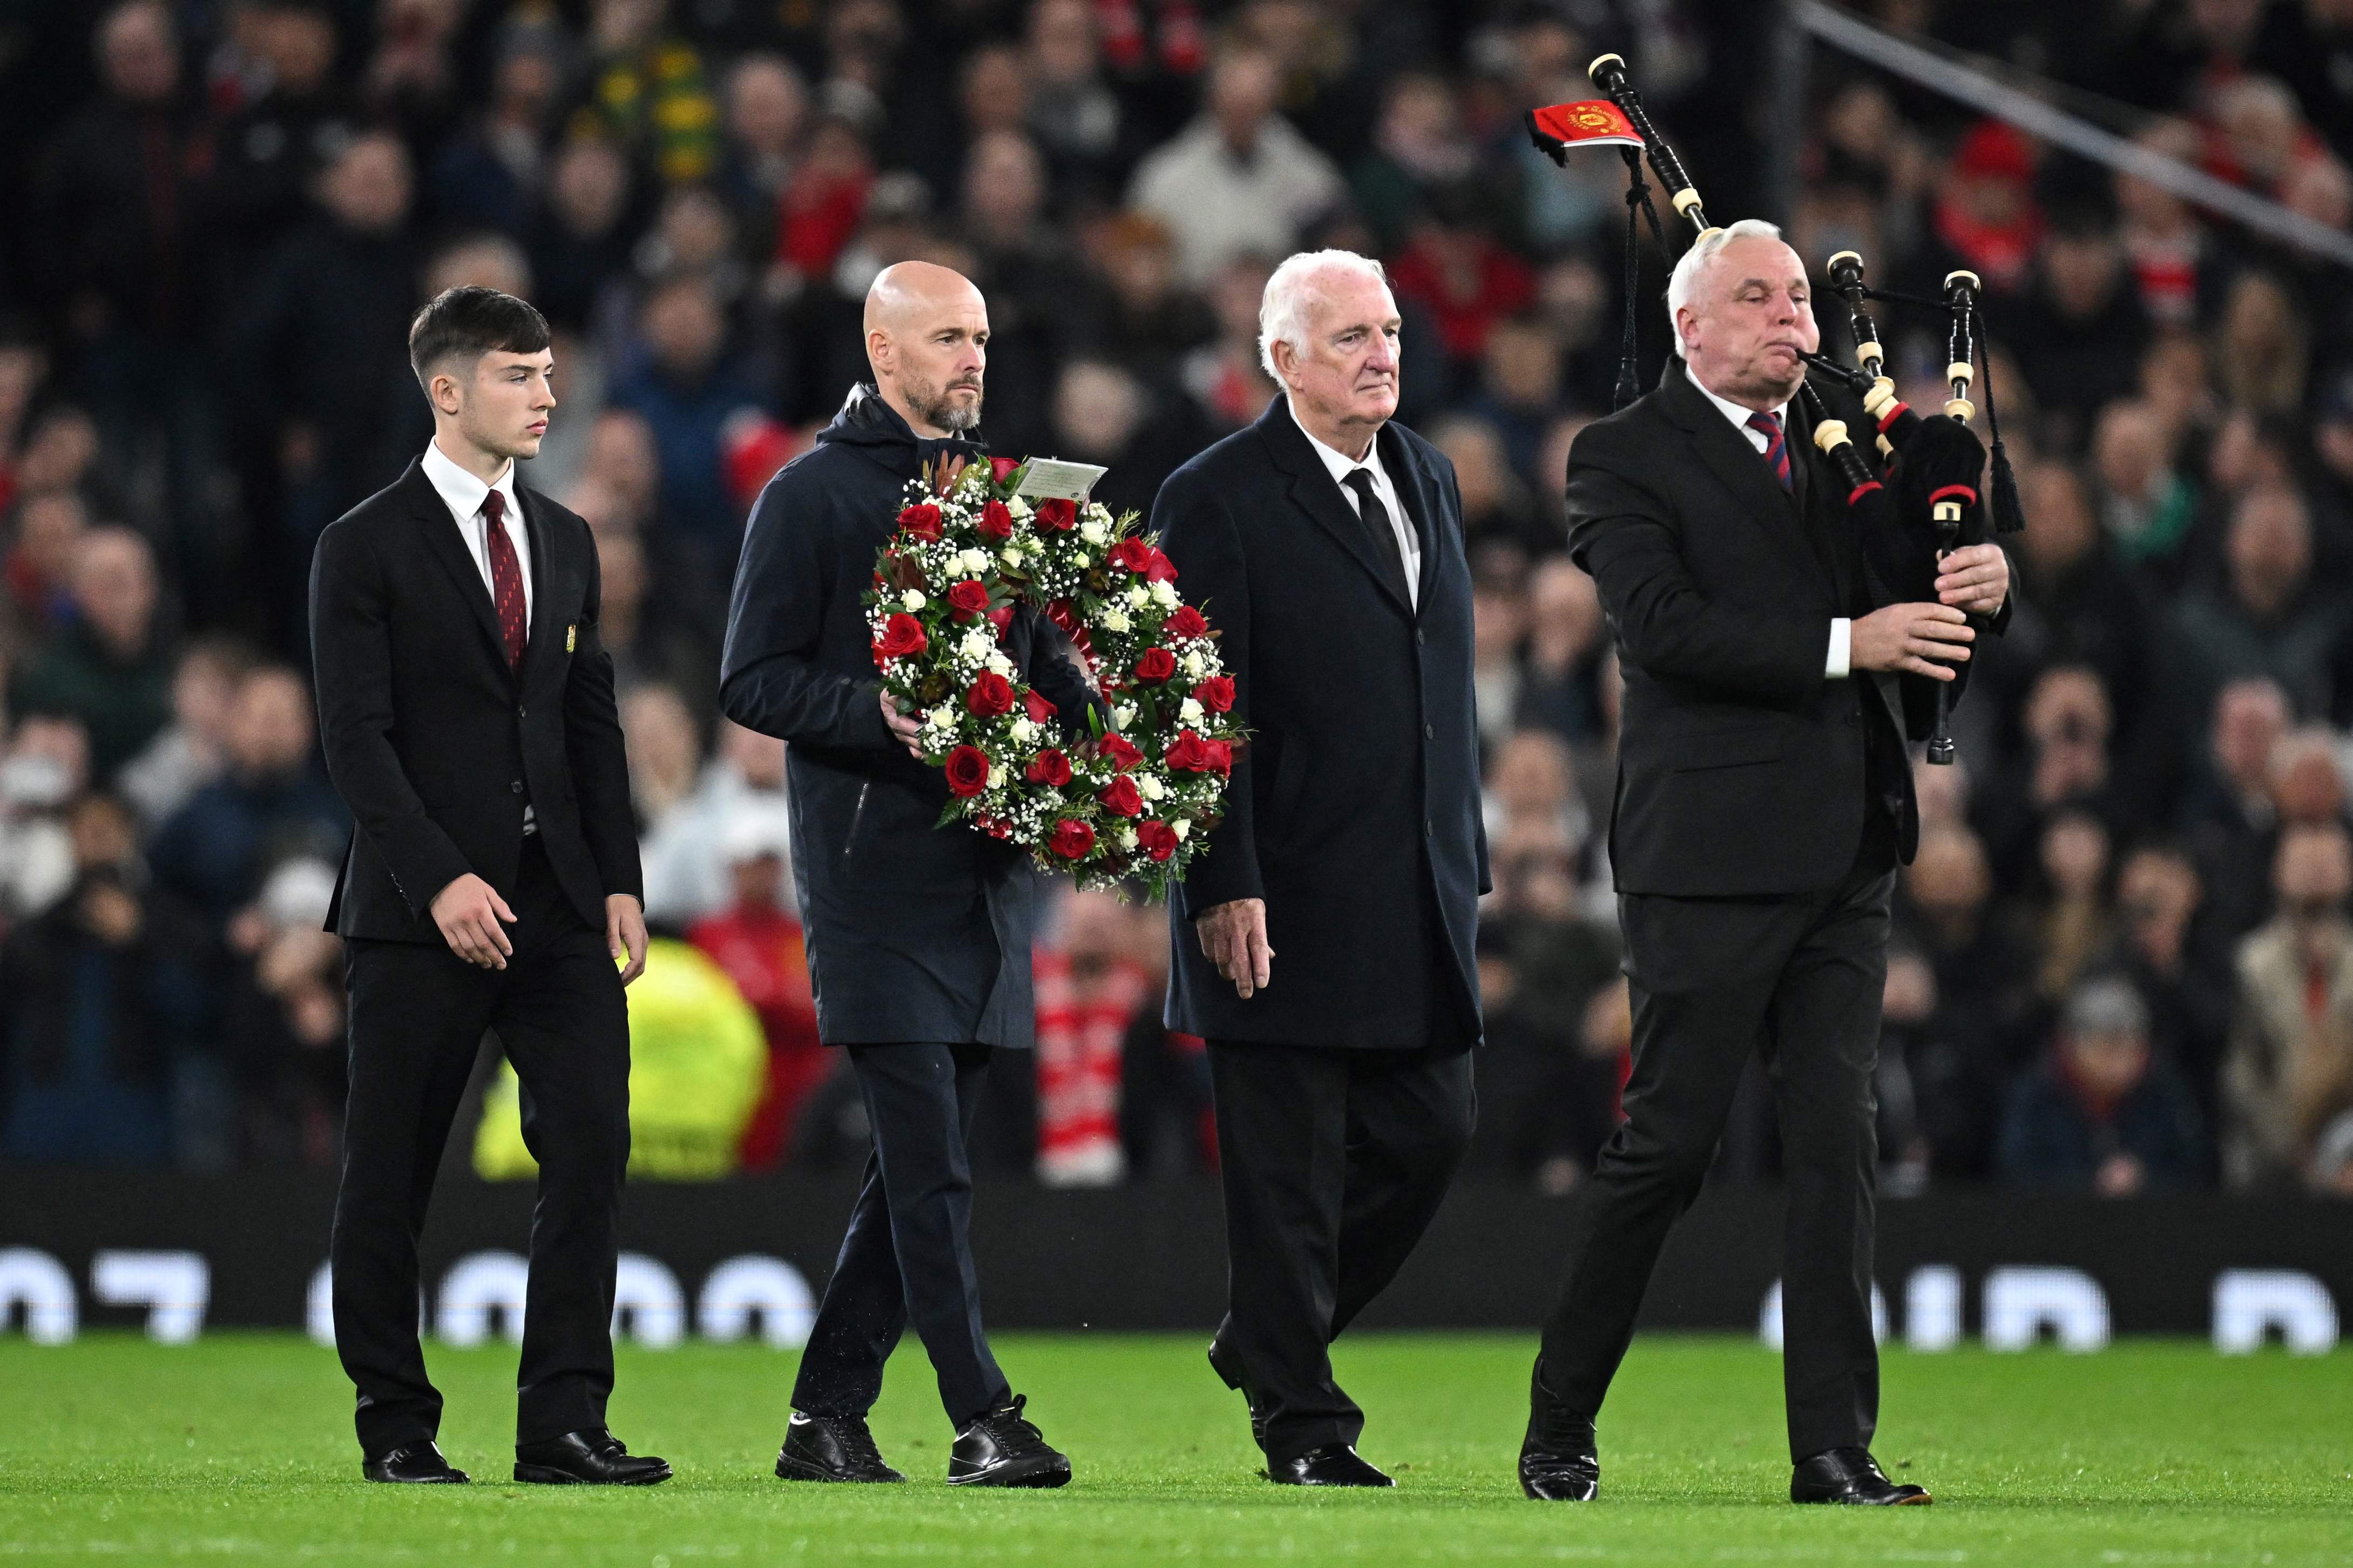 Erik ten Hag carries a wreath of flowers next to Alex Stepney and Dan Gore during a tribute to late Bobby Charlton